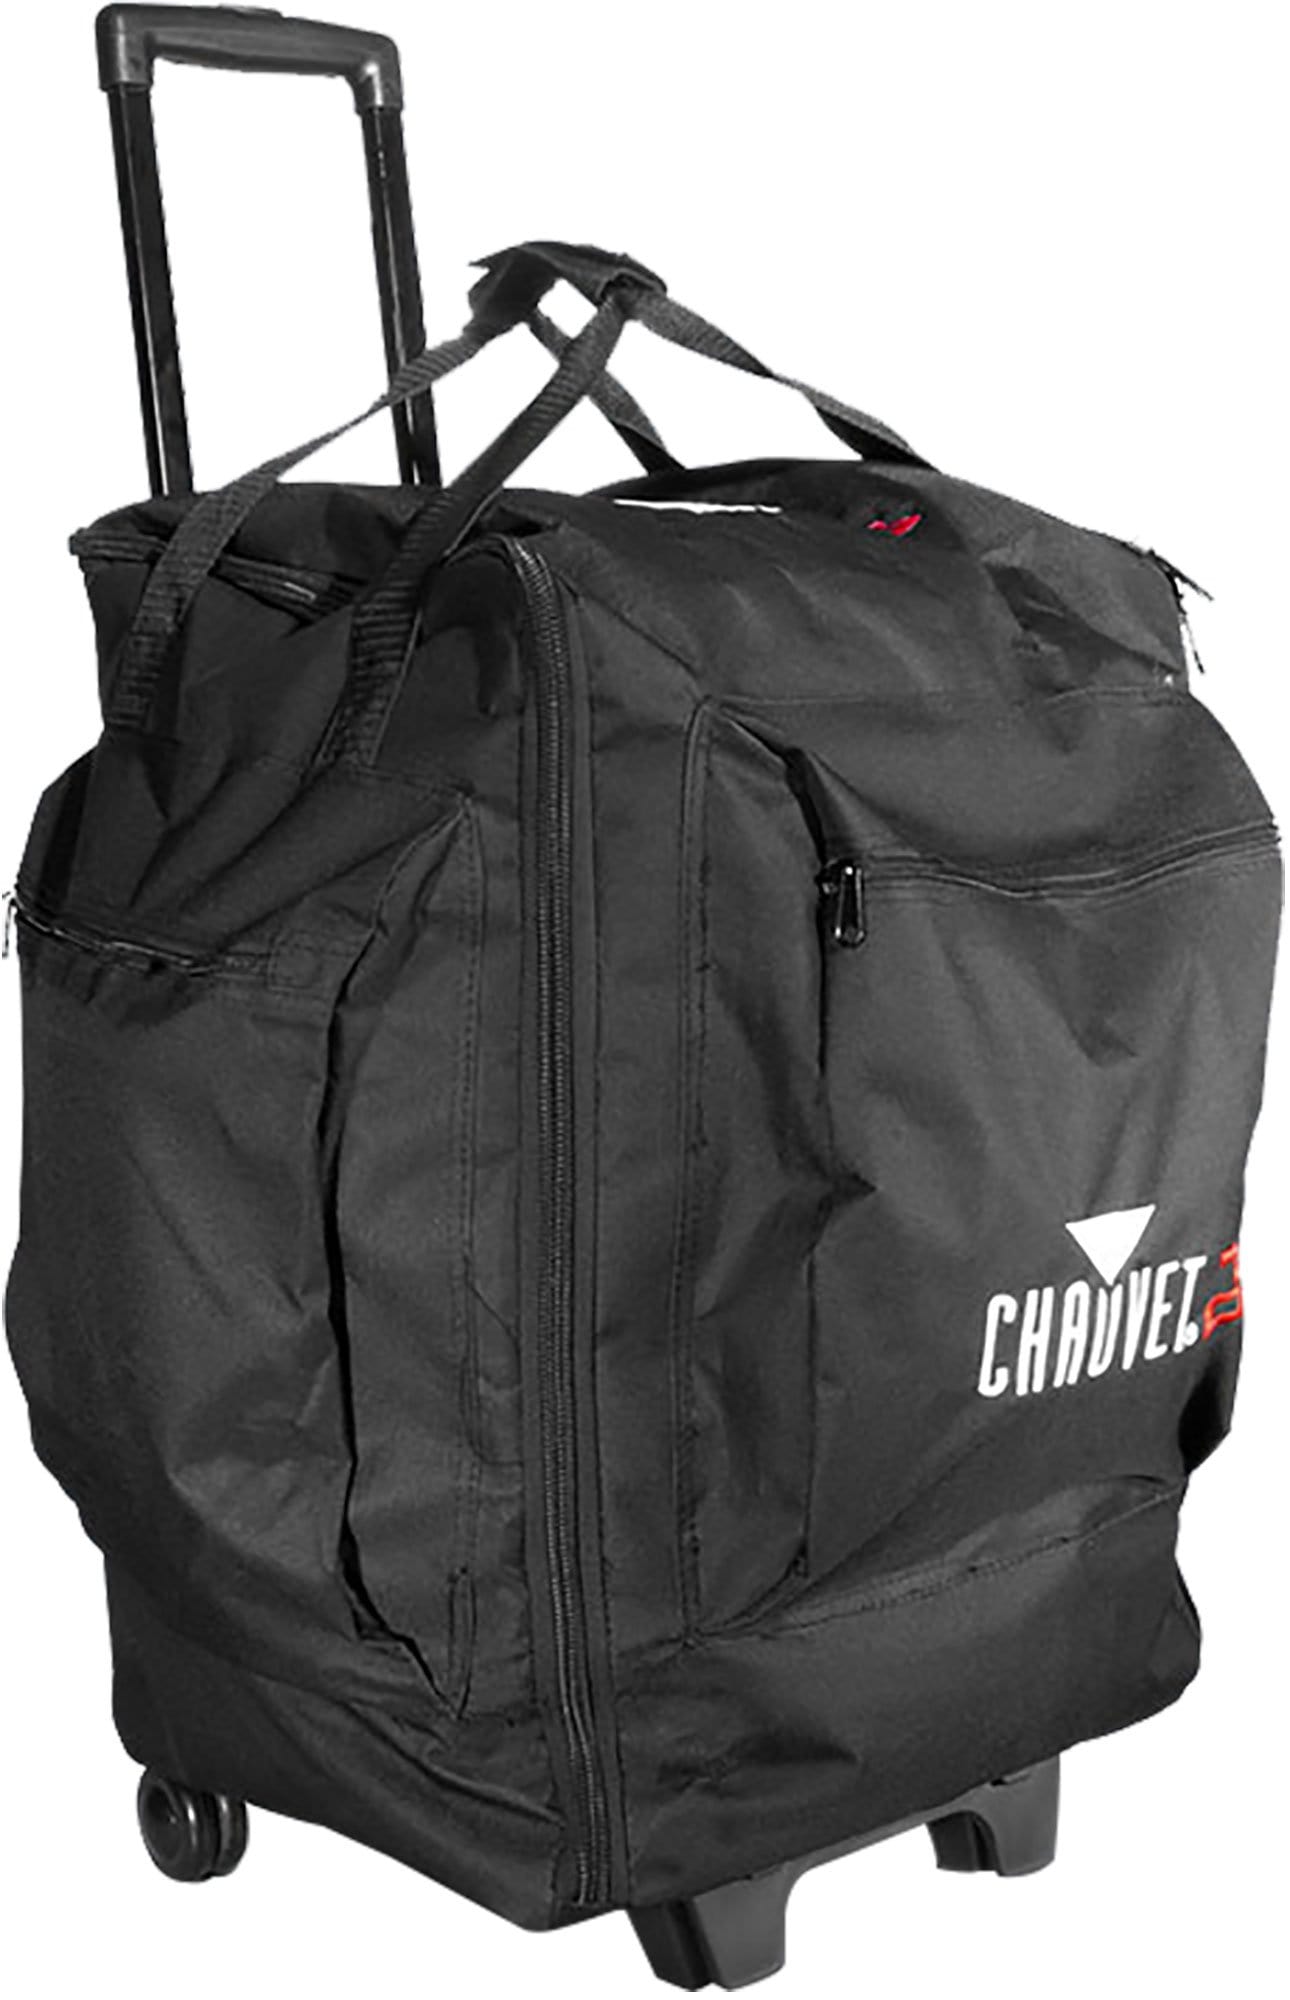 Chauvet CHS-50 13"x14"x23" Travel Bag with Wheels - PSSL ProSound and Stage Lighting